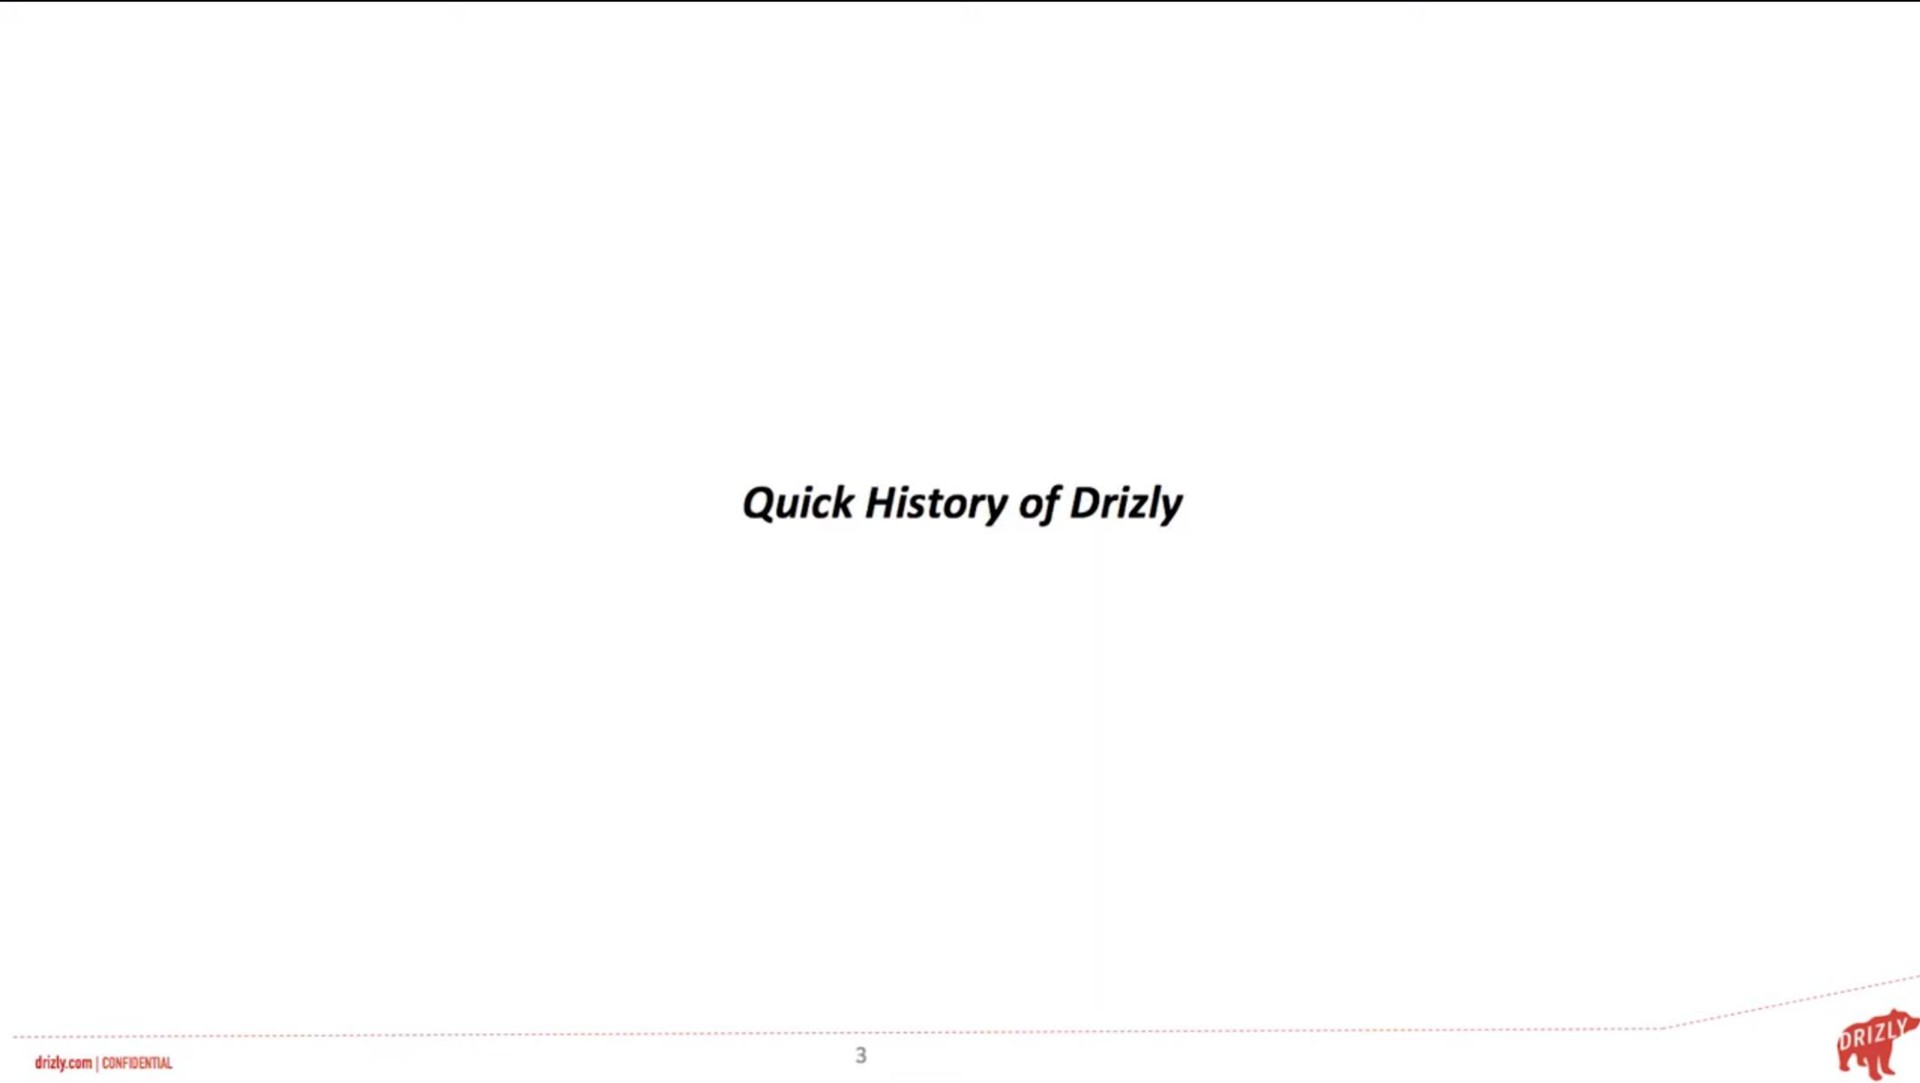 quick history of | Drizly